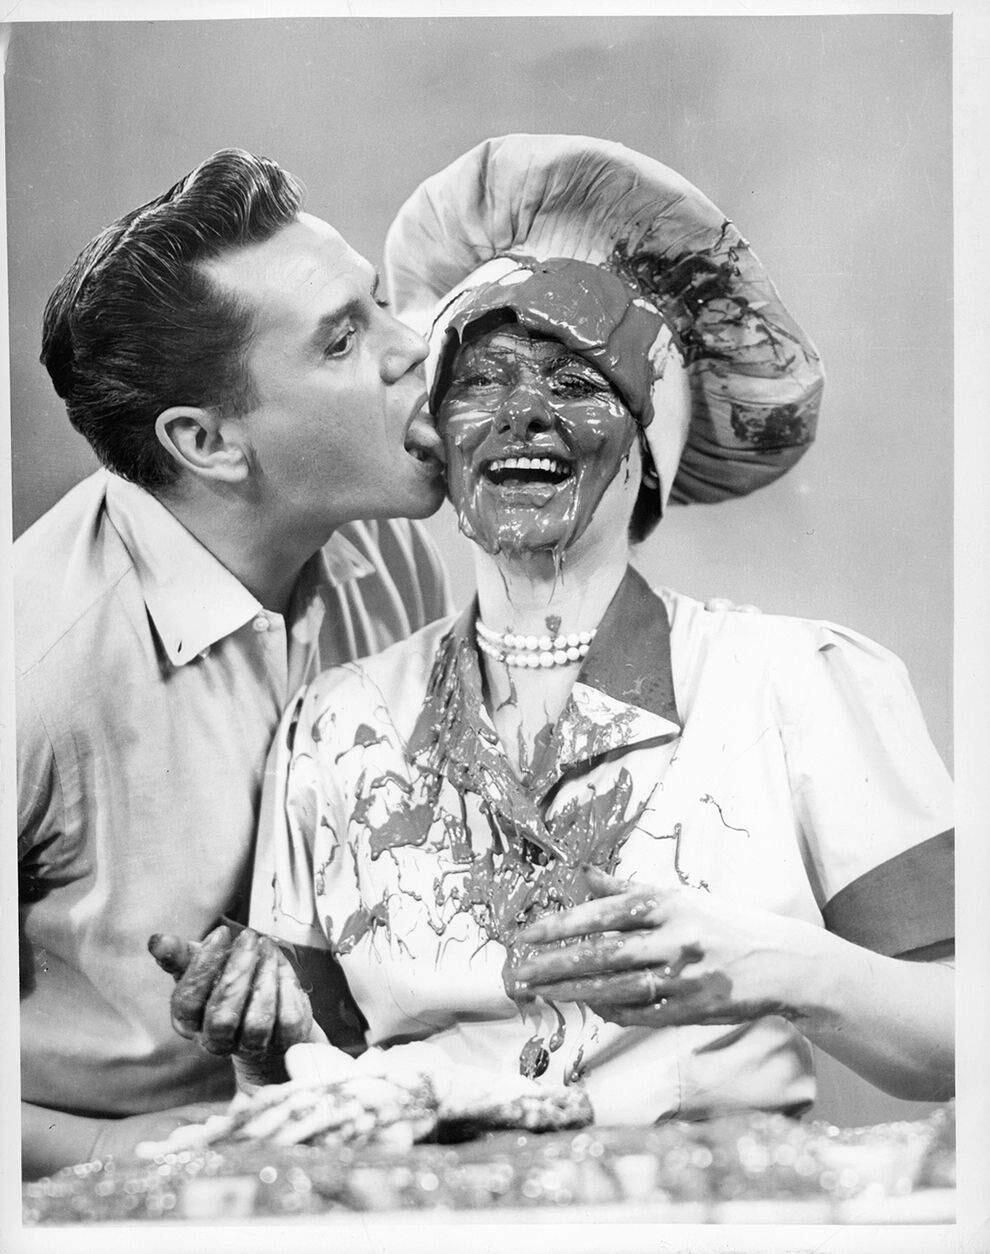 Desi Arnaz flaunted social-distancing norms with Lucille Ball following the filming of the famous chocolate factory scene in 1952.